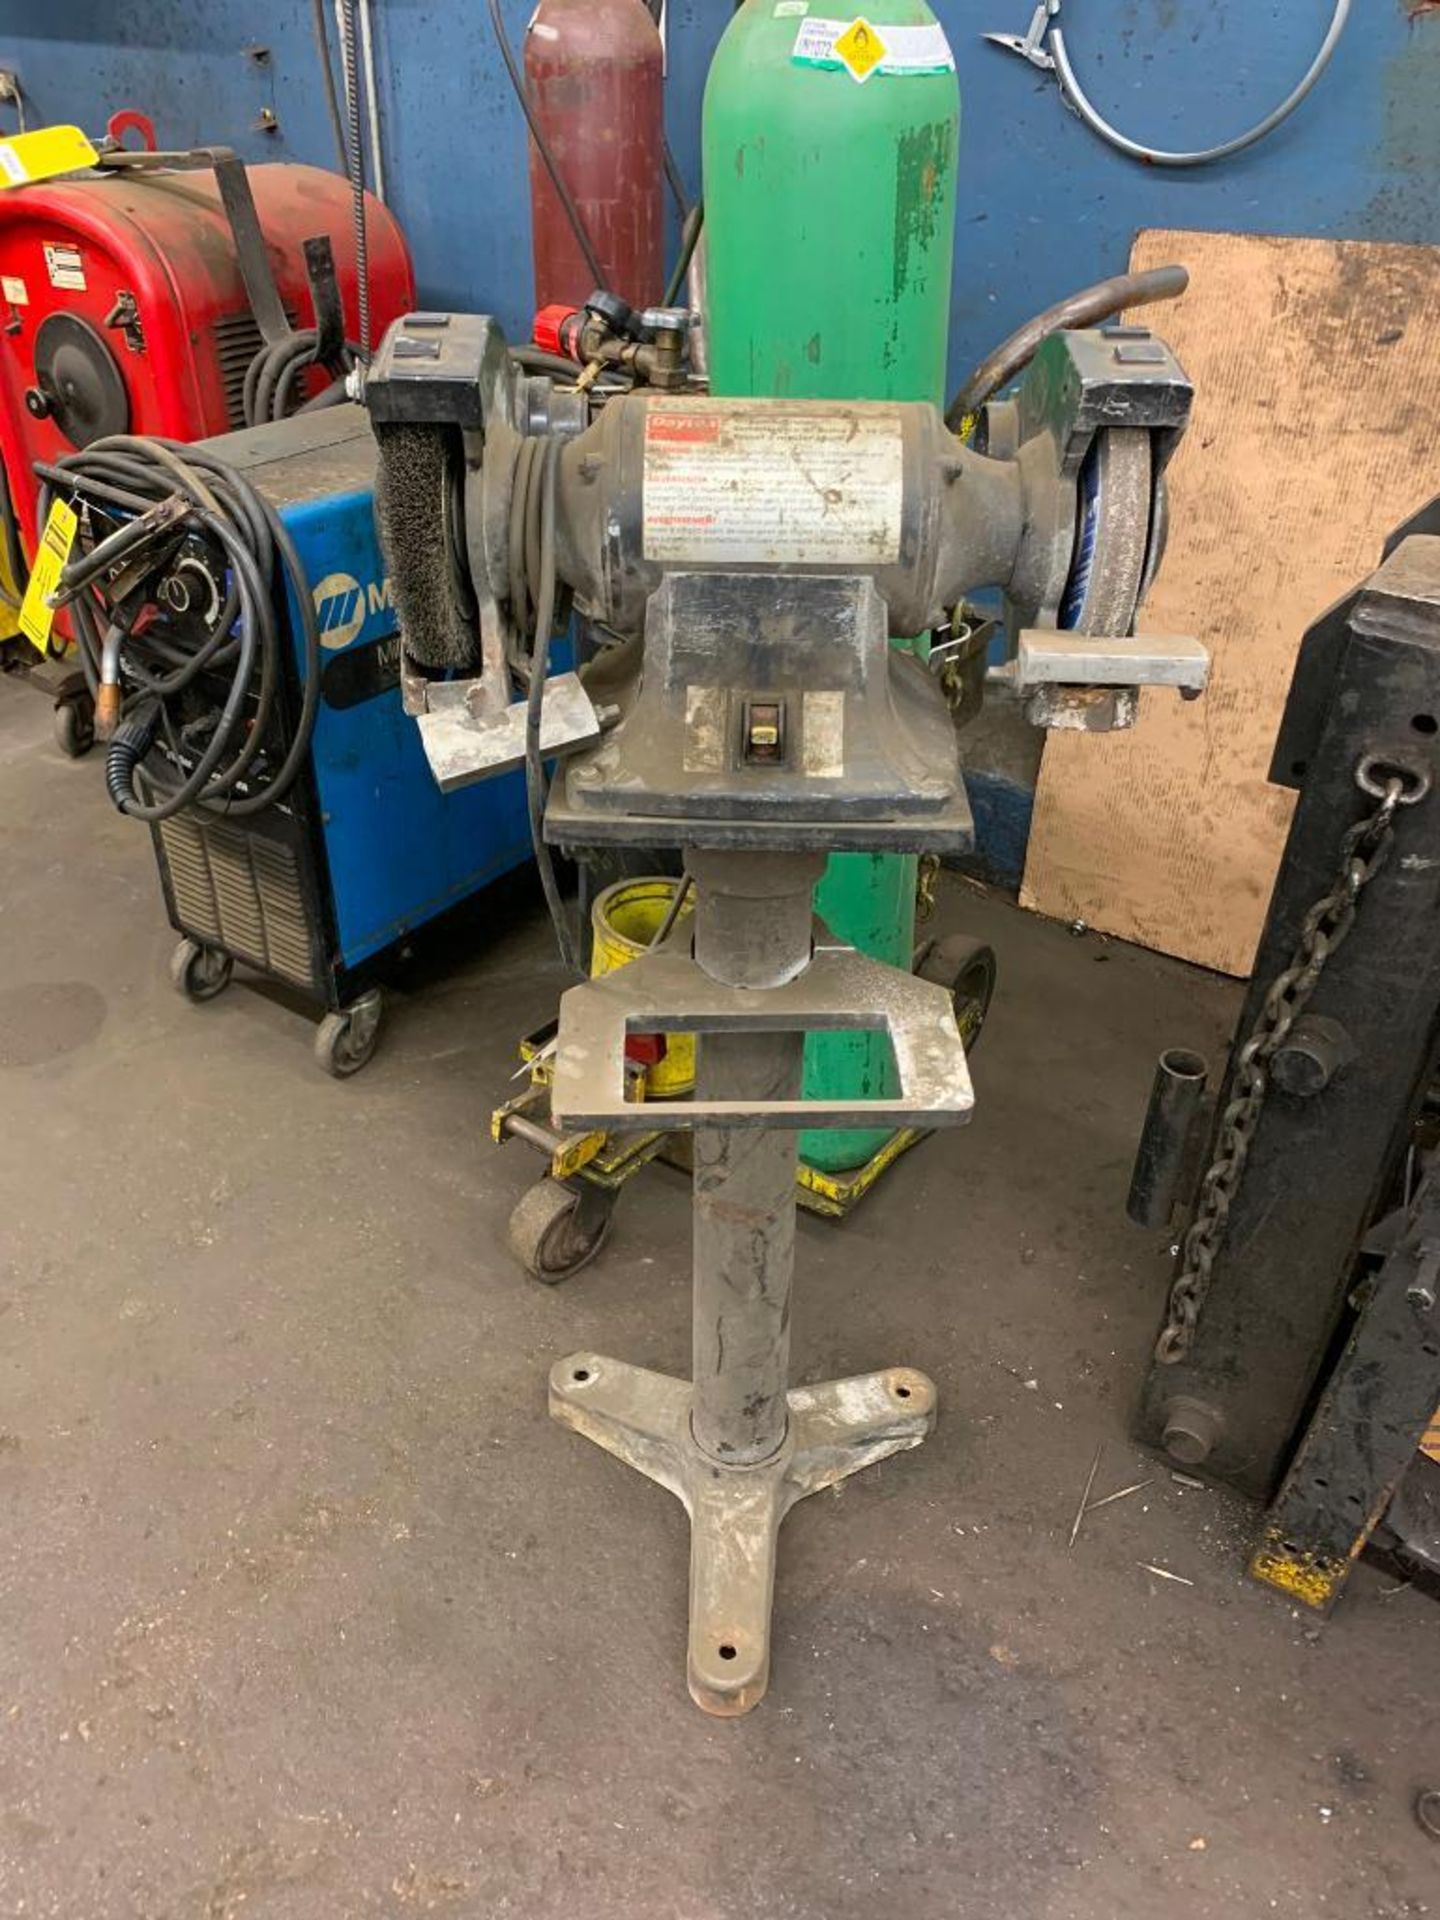 Dayton 8" Pedestal Grinder, 3/4-HP, 3450 RPM, 120/240 V ($25 Loading Fee will be added to buyers inv